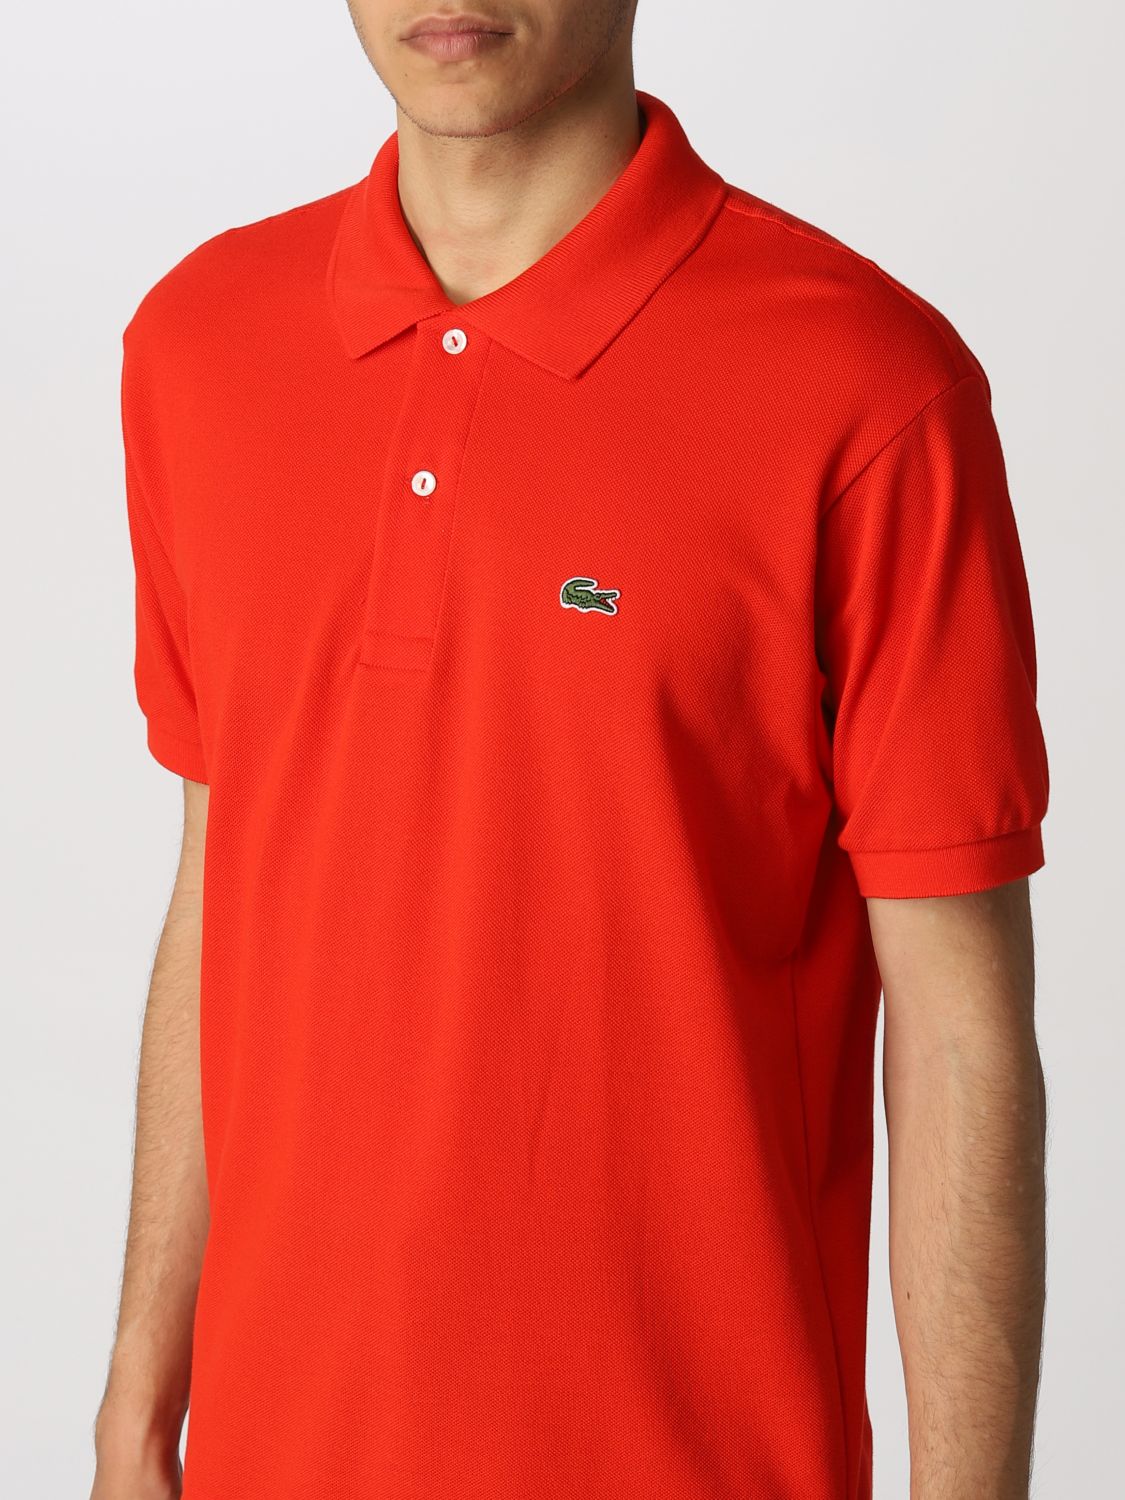 LACOSTE: basic polo shirt logo - Red | Lacoste polo shirt L1212 online on GIGLIO.COM